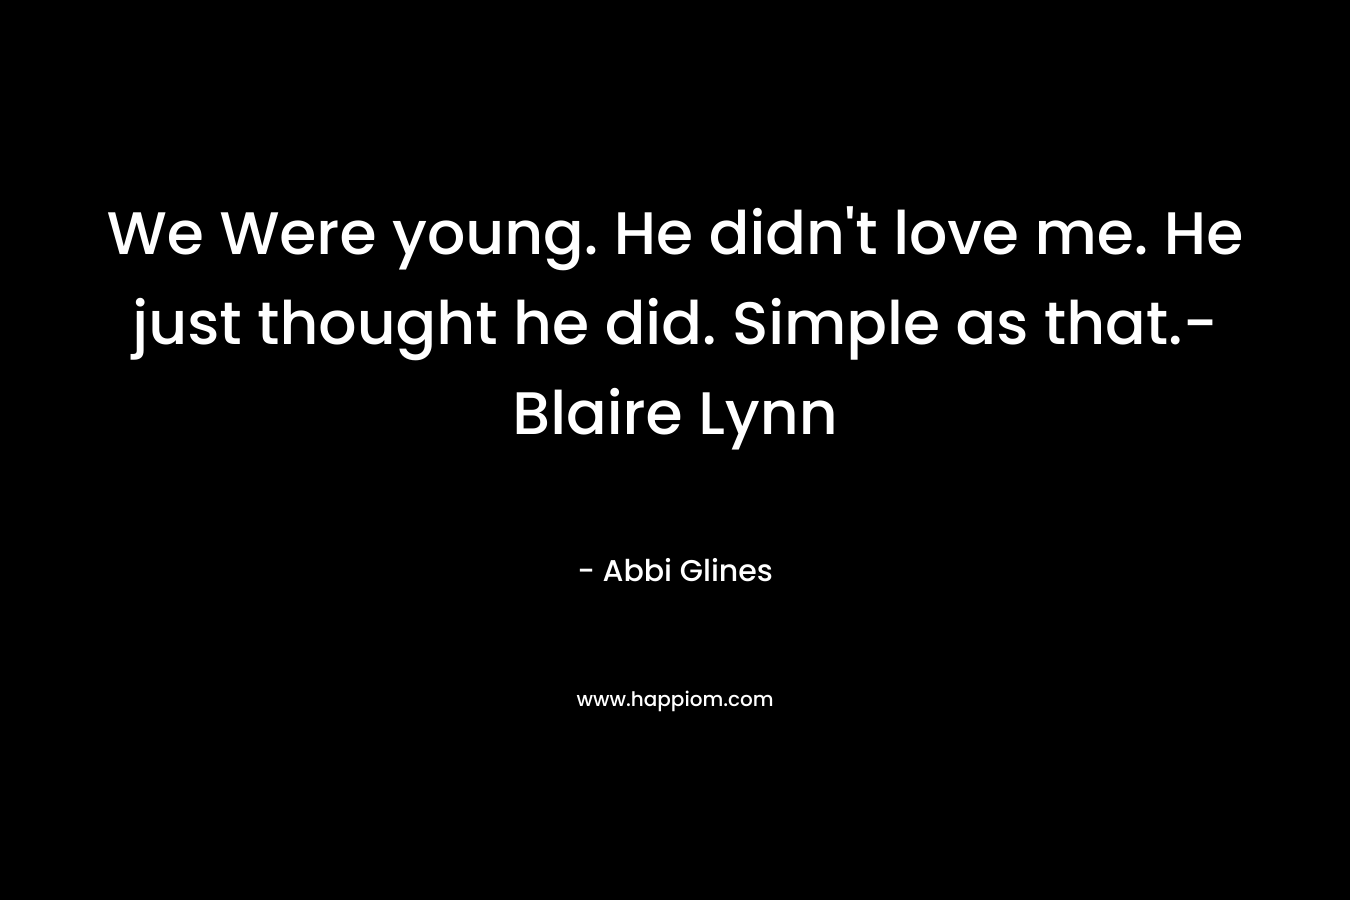 We Were young. He didn't love me. He just thought he did. Simple as that.- Blaire Lynn